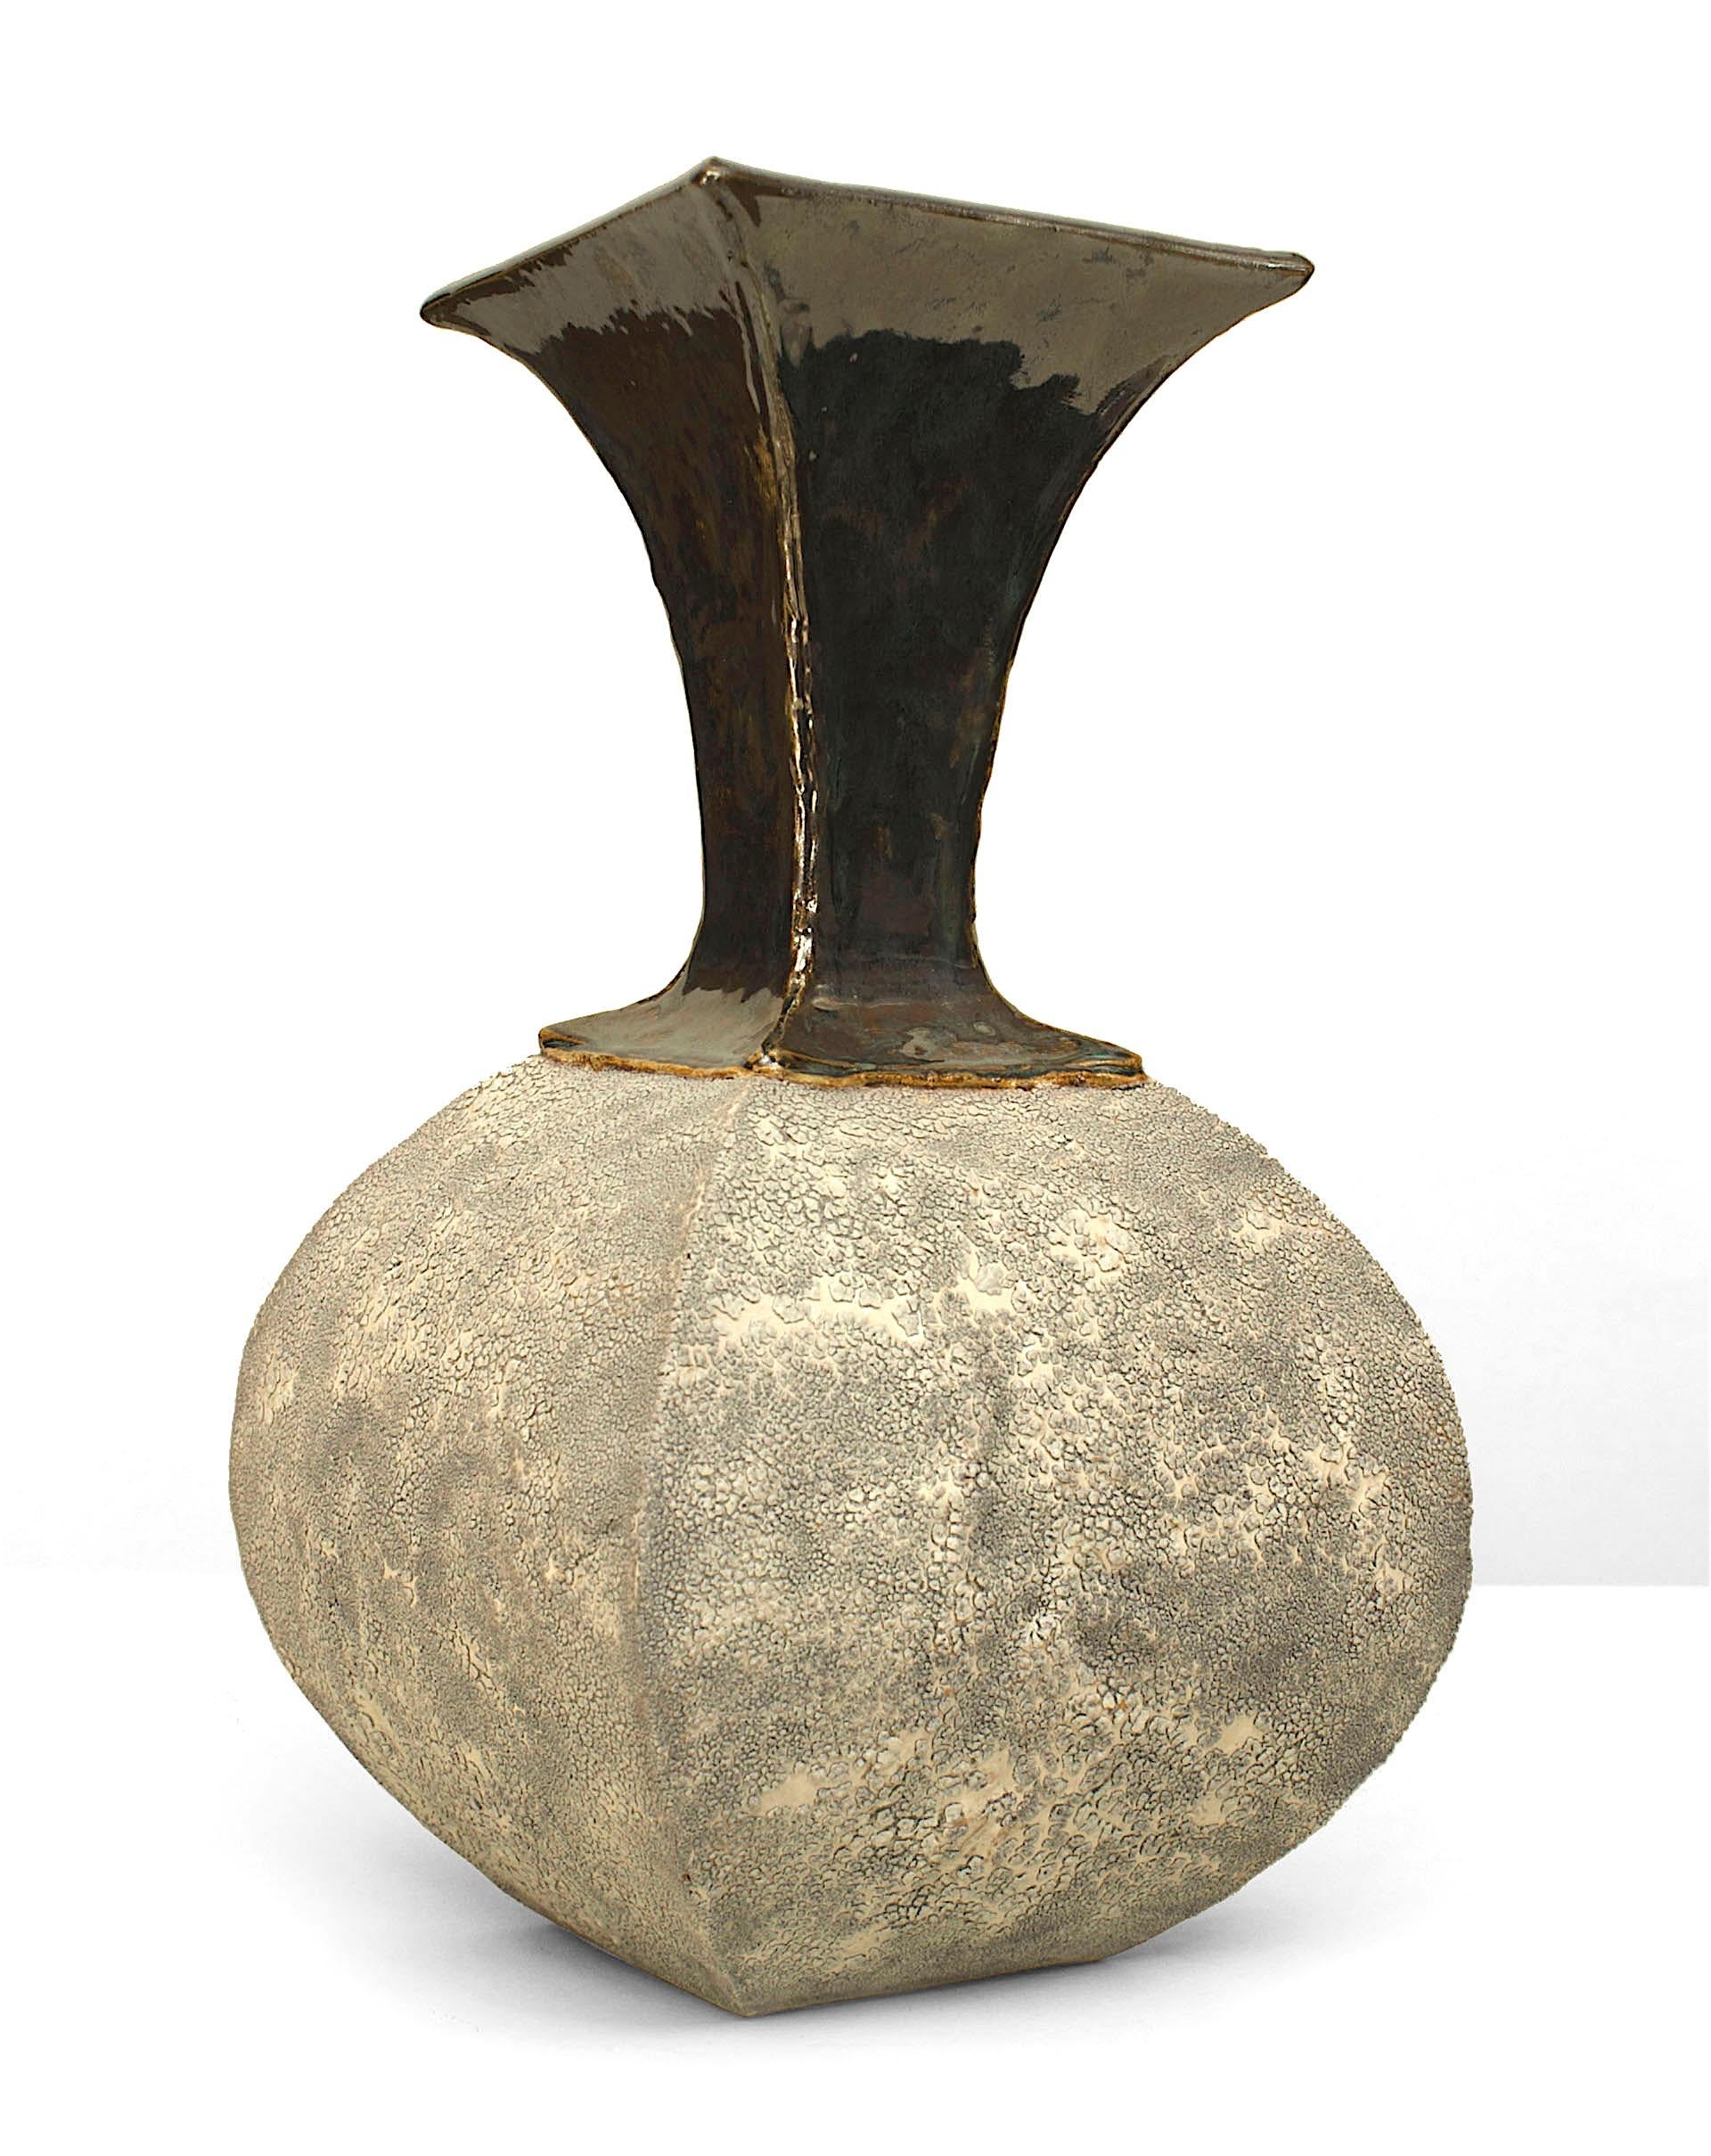 American Post-War Design grey and white textured bulbous square base vase with a glazed tapered and flared neck (signed: GARY DI PASQUALE)
